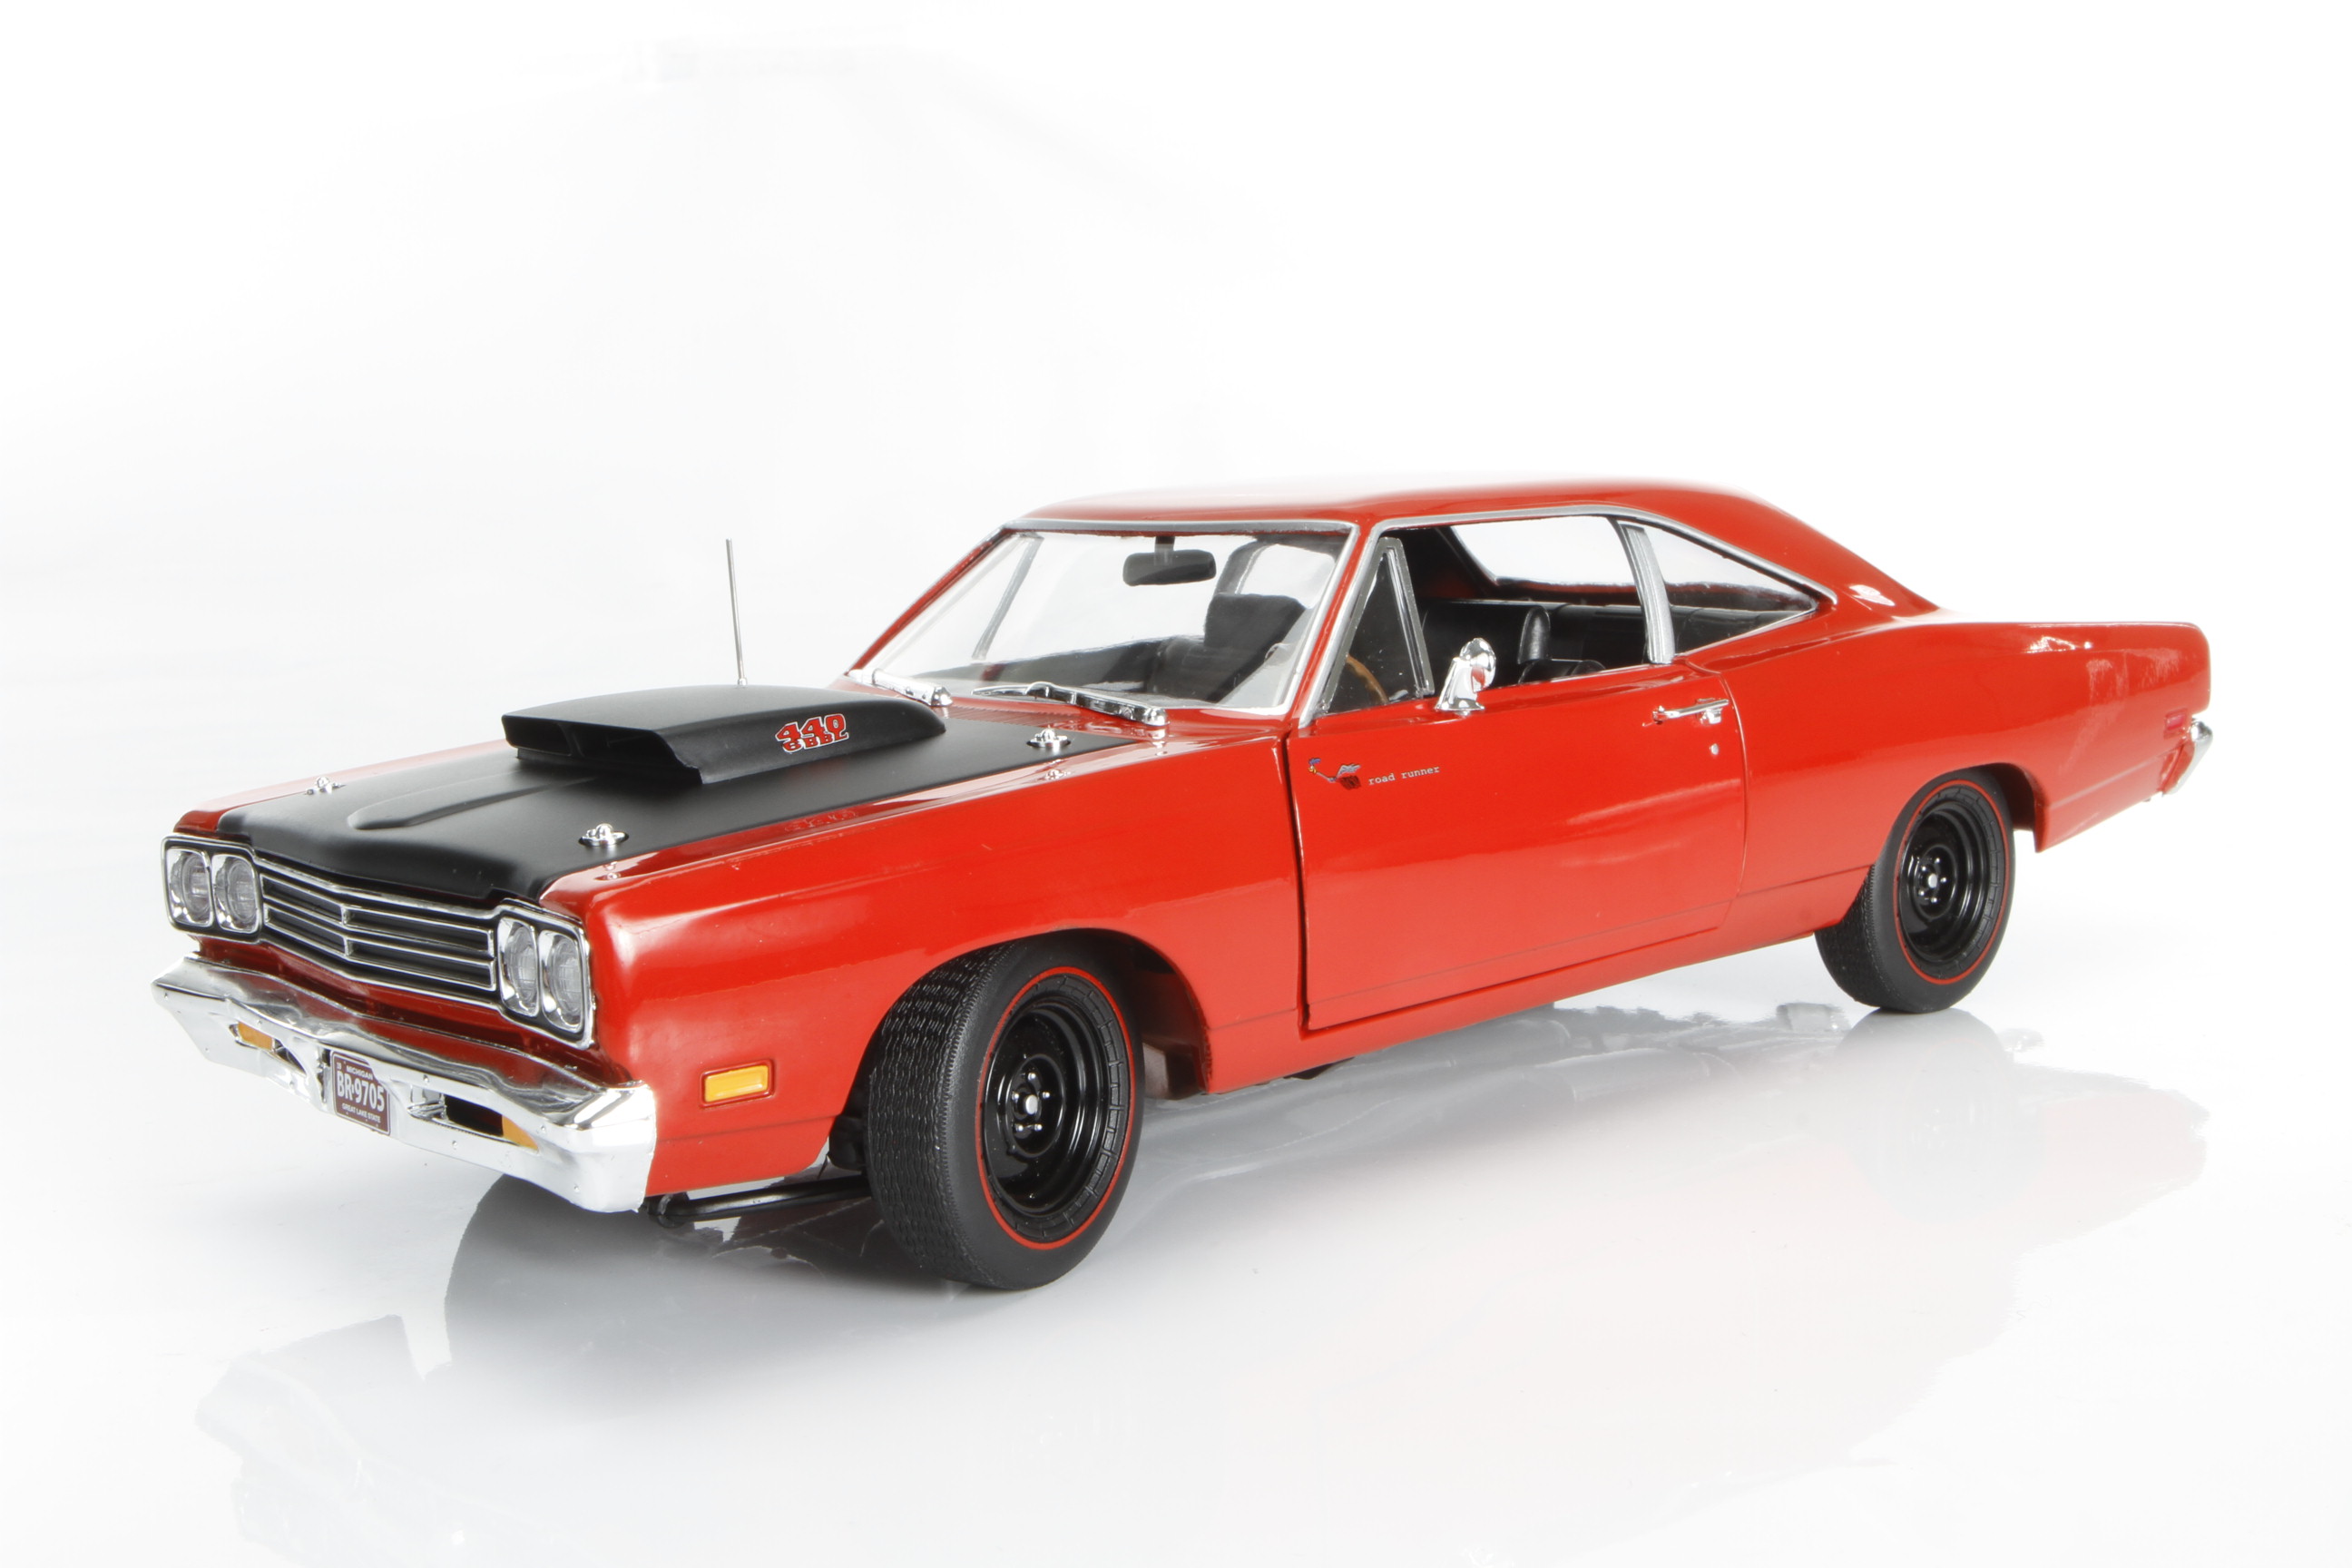 American Muscle Details about   1:18 1969 Plymouth Road Runner Tuxedo Black 